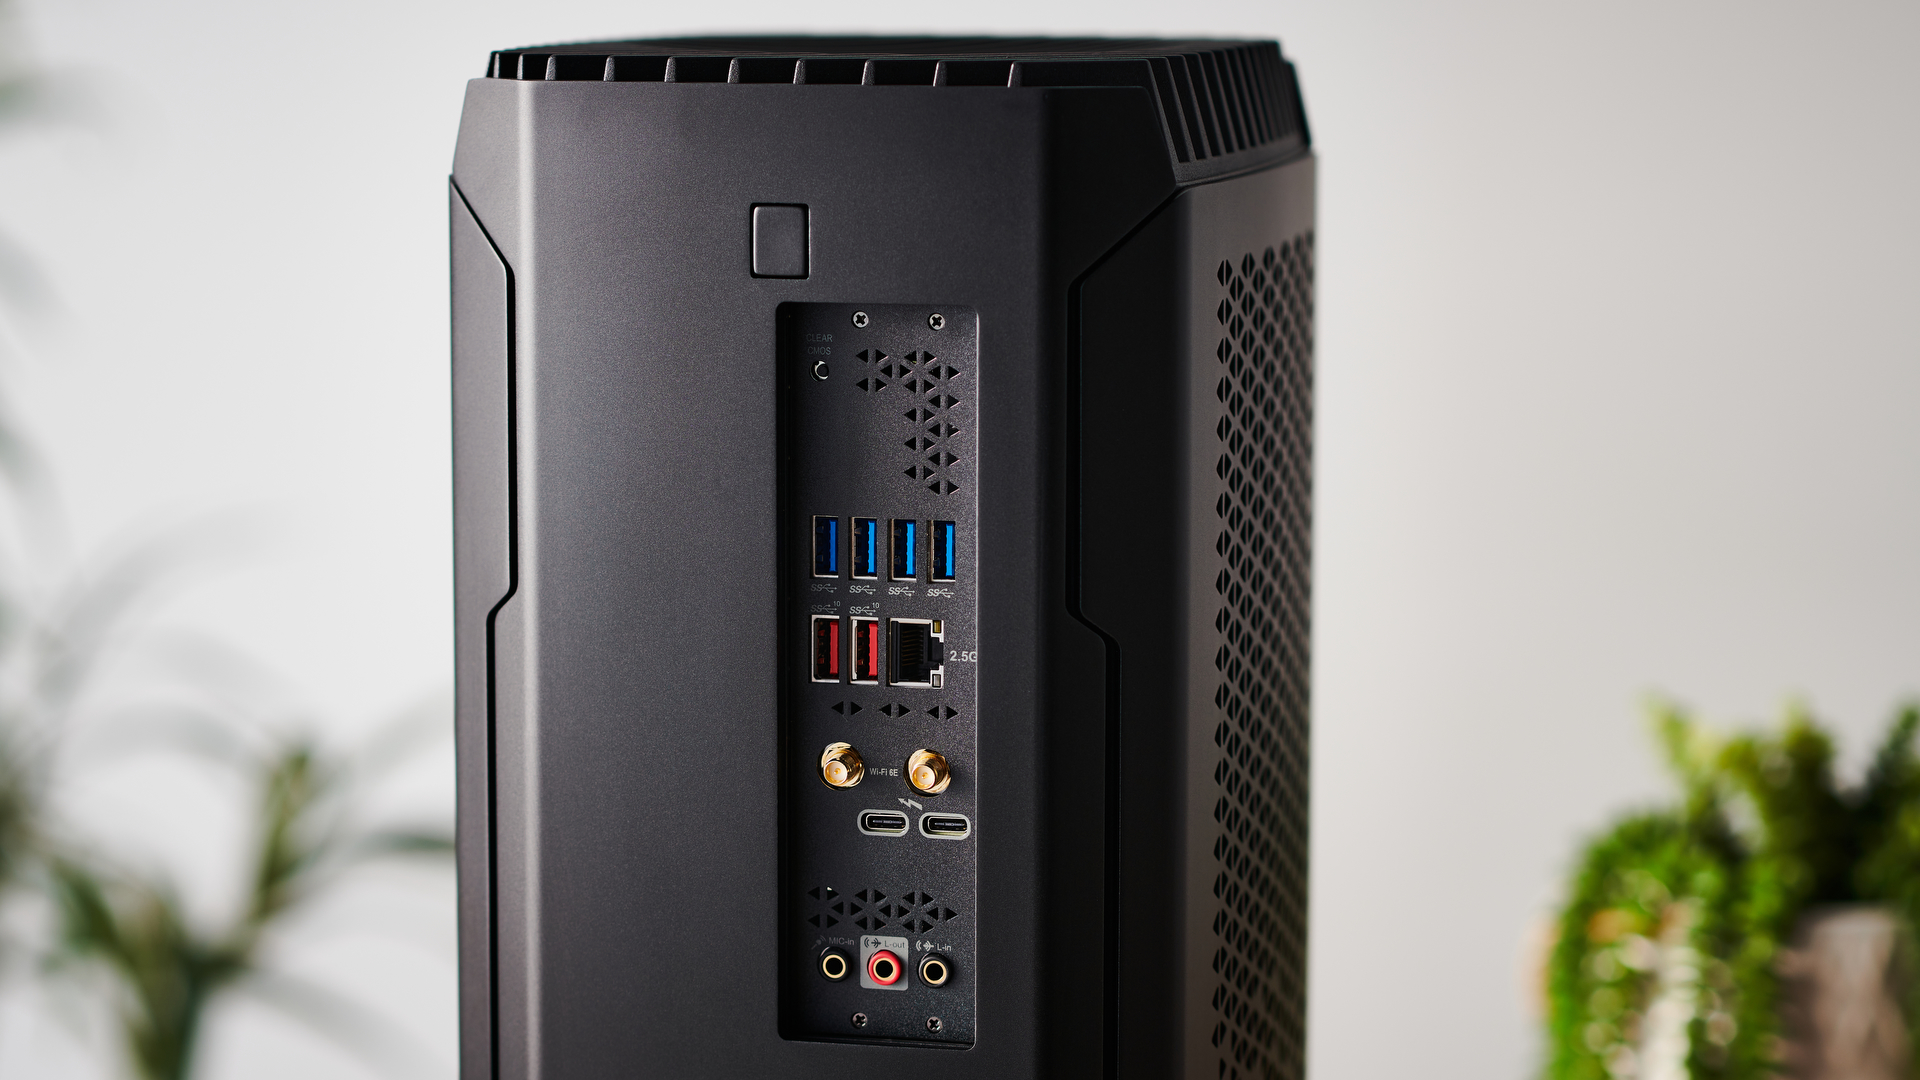 Corsair One i300 gaming PC on wooden desk